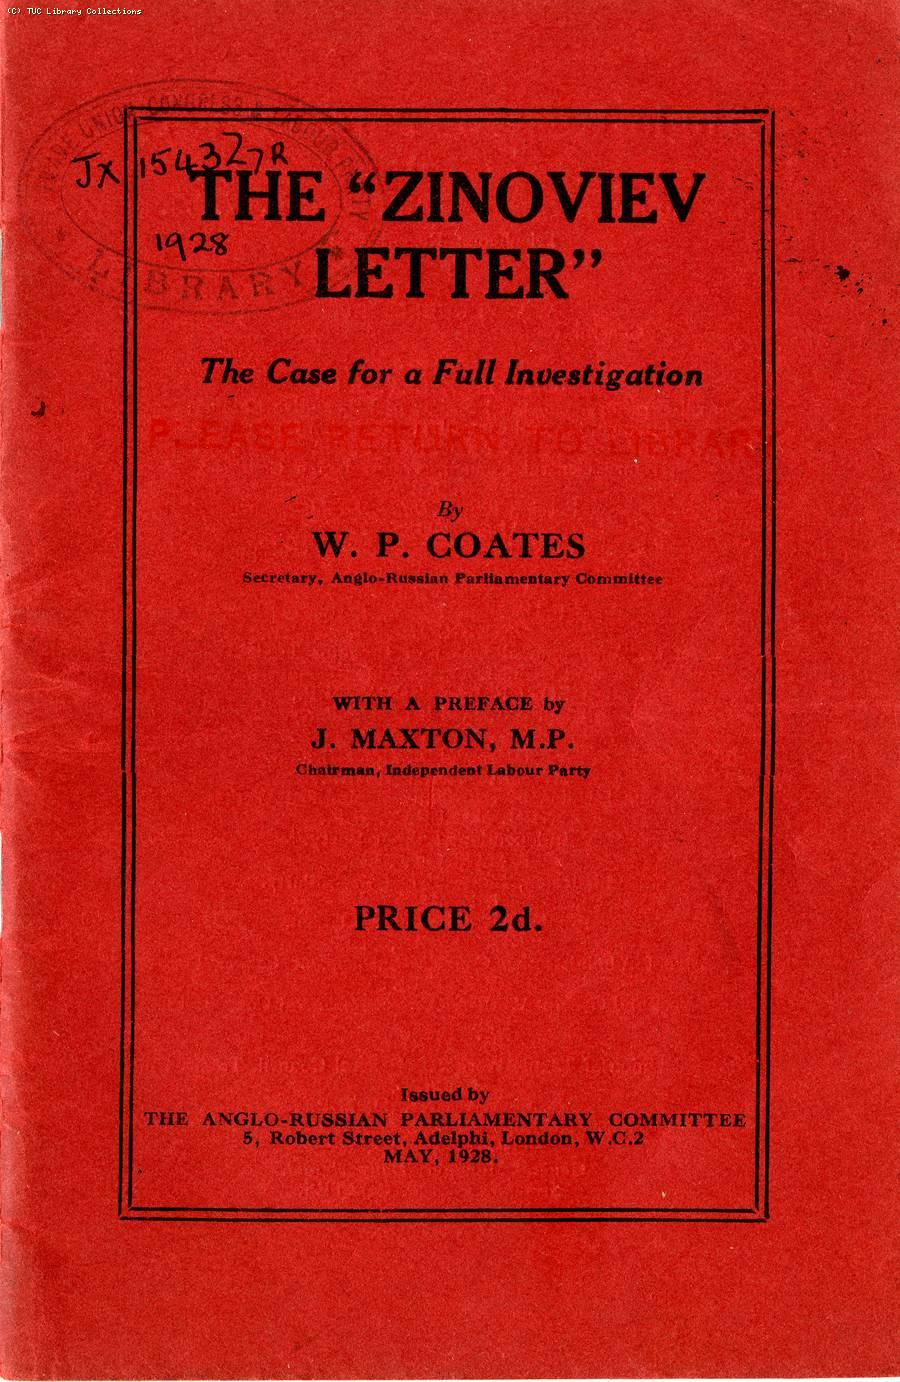 The Zinoviev letter: the case for a full investigation 1928